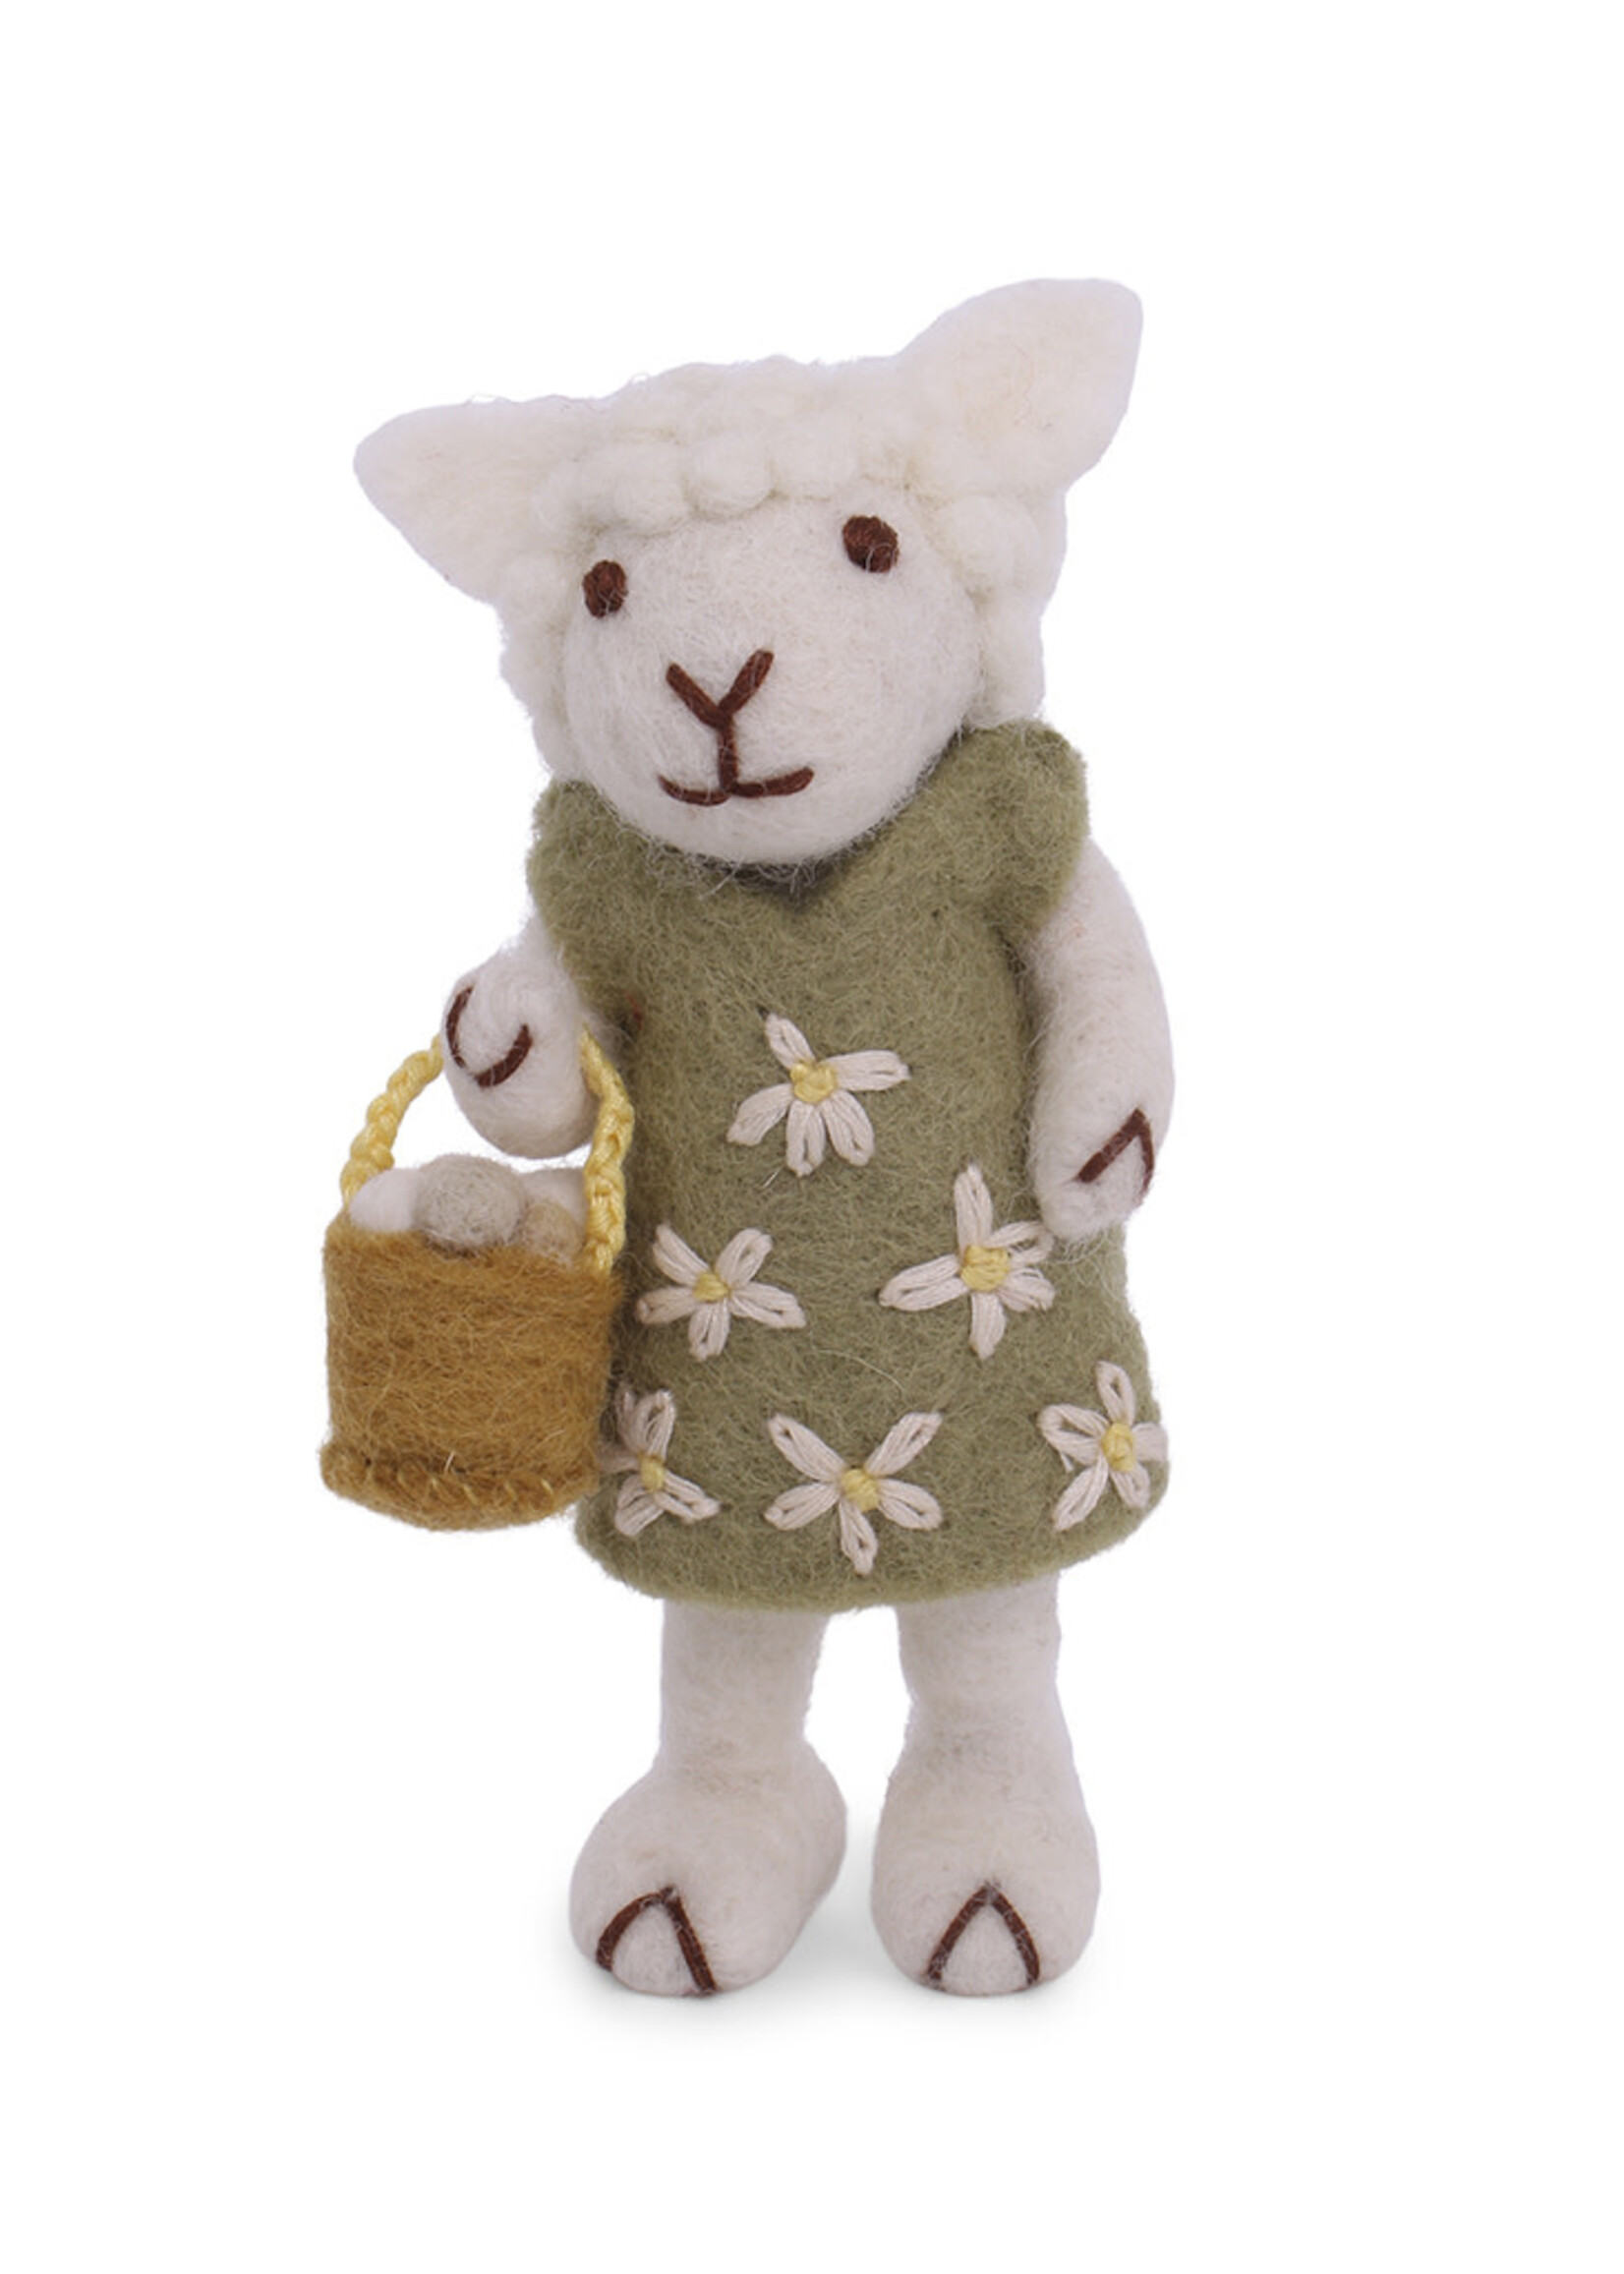 Gry and Sif Felt Sheep Ornament - Green Dress and Egg Basket